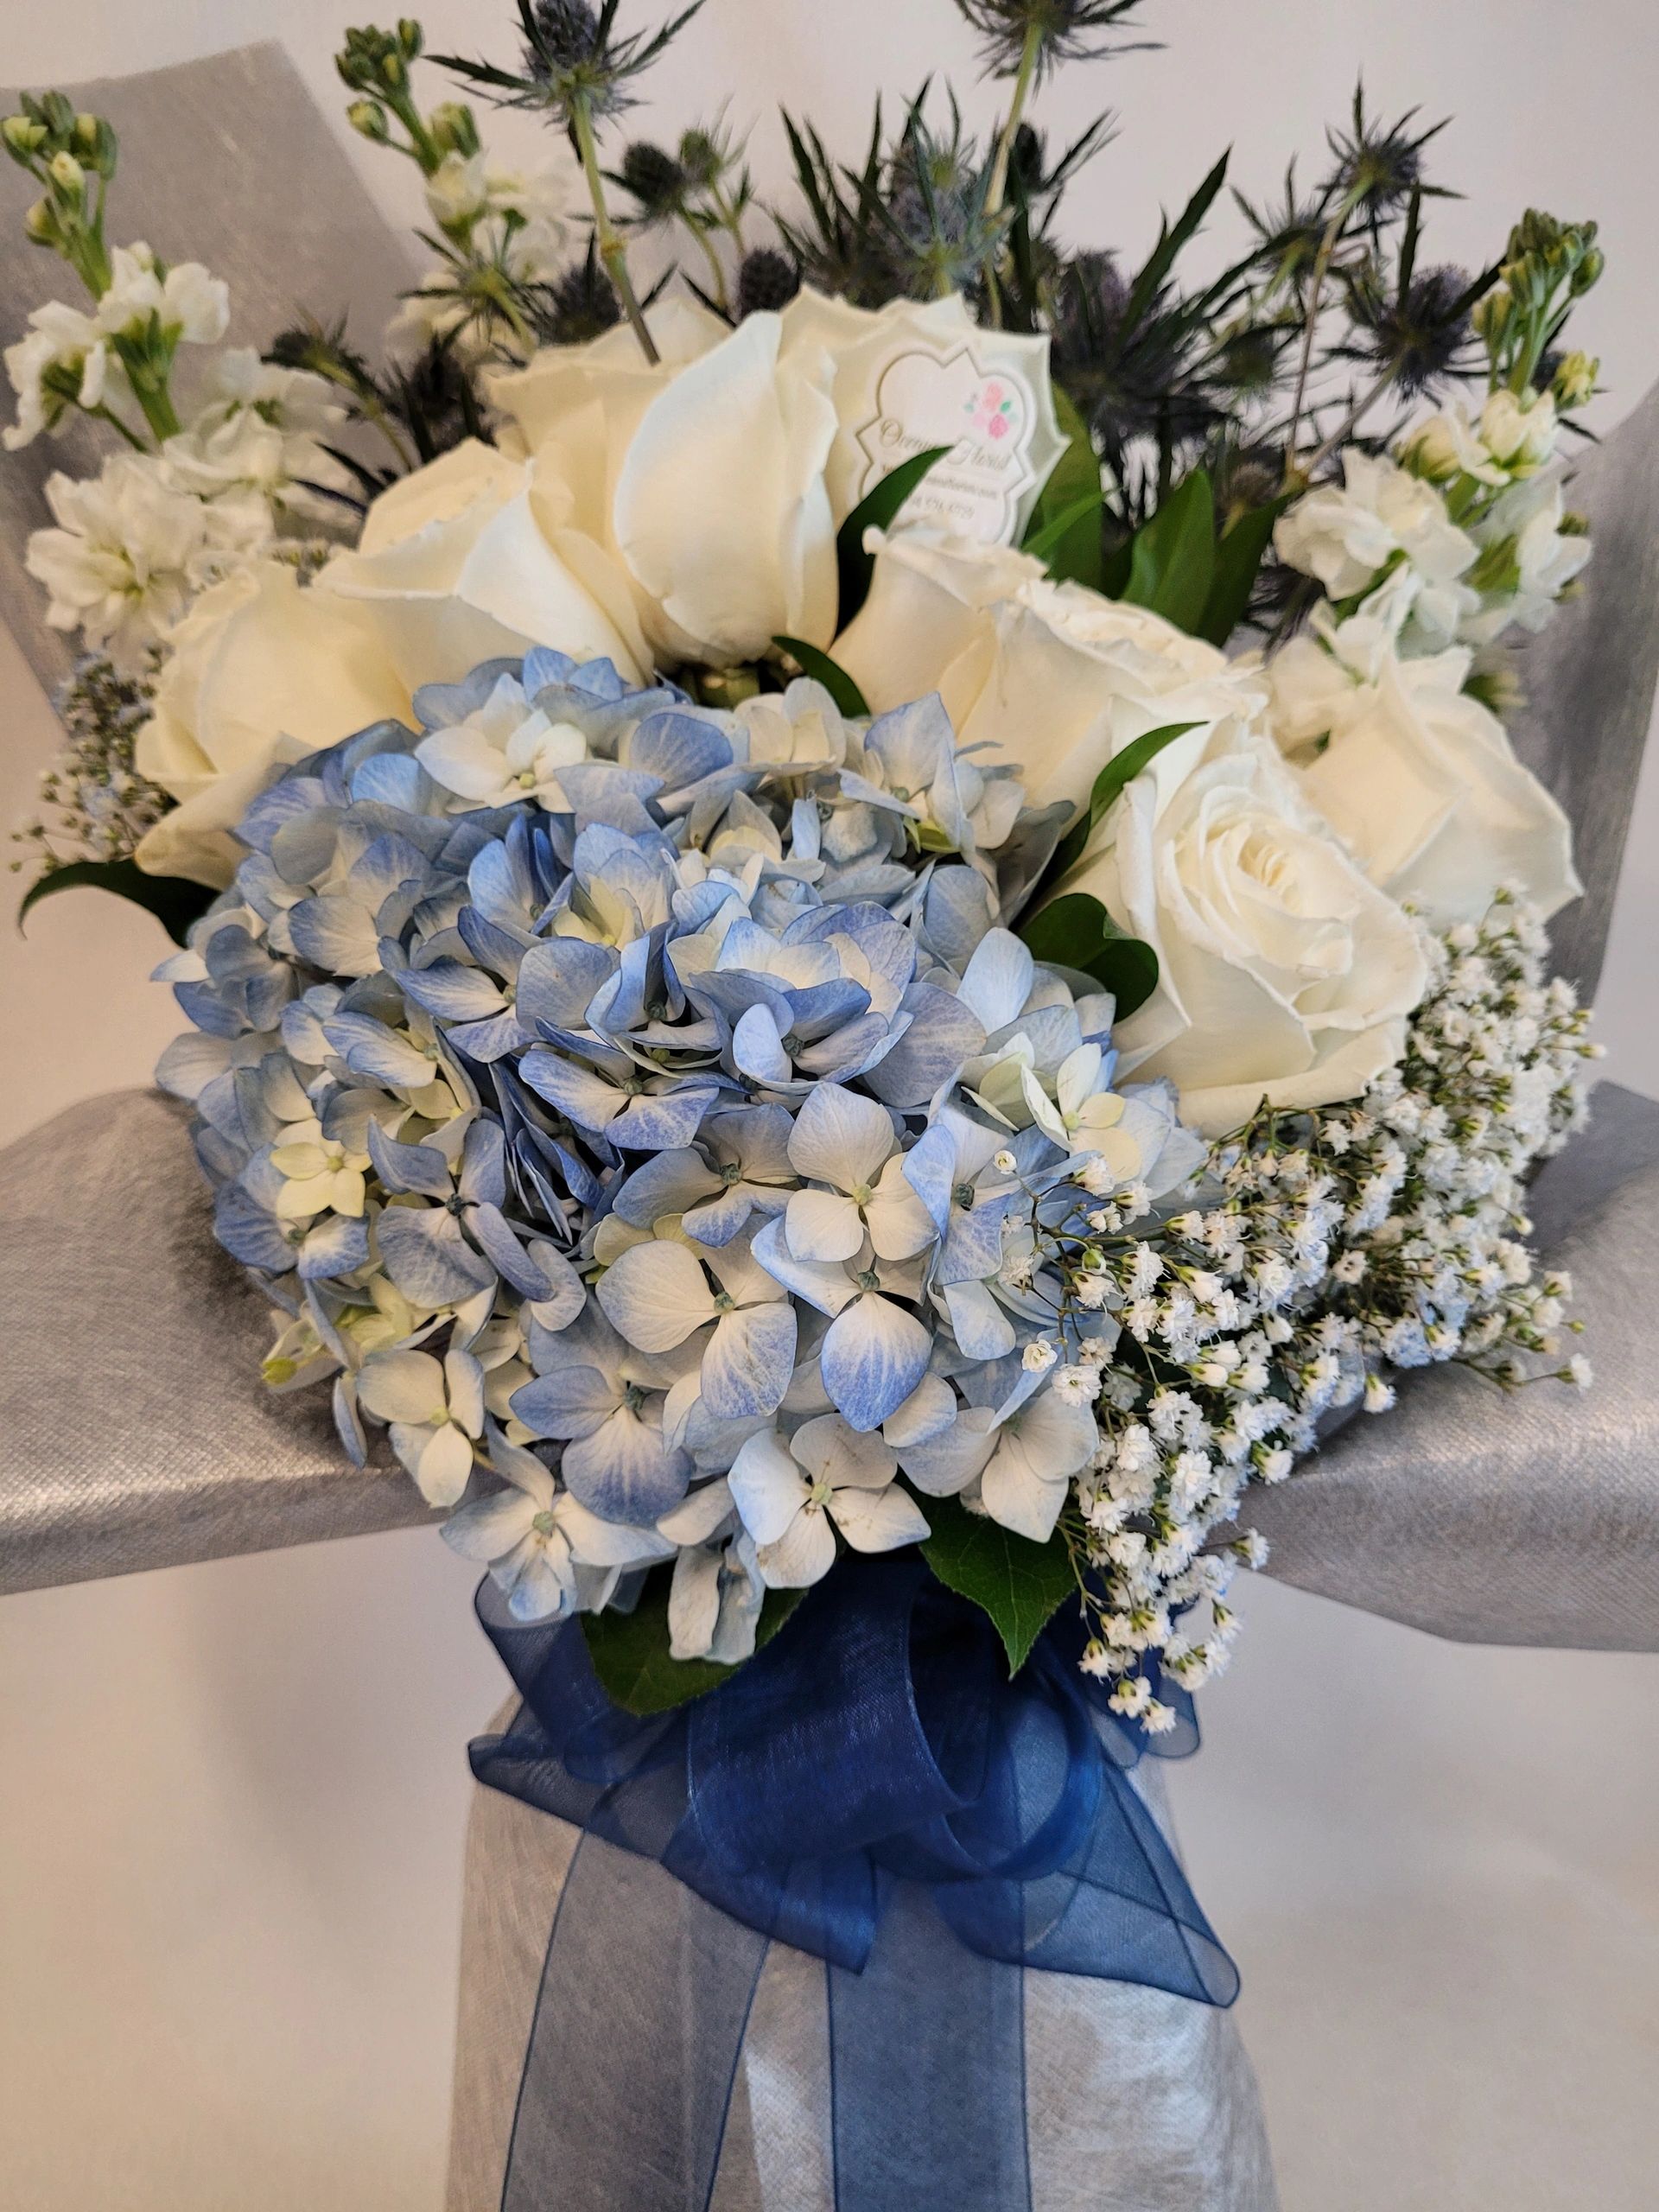 Blue hydrangia and white roses flower arrangement.